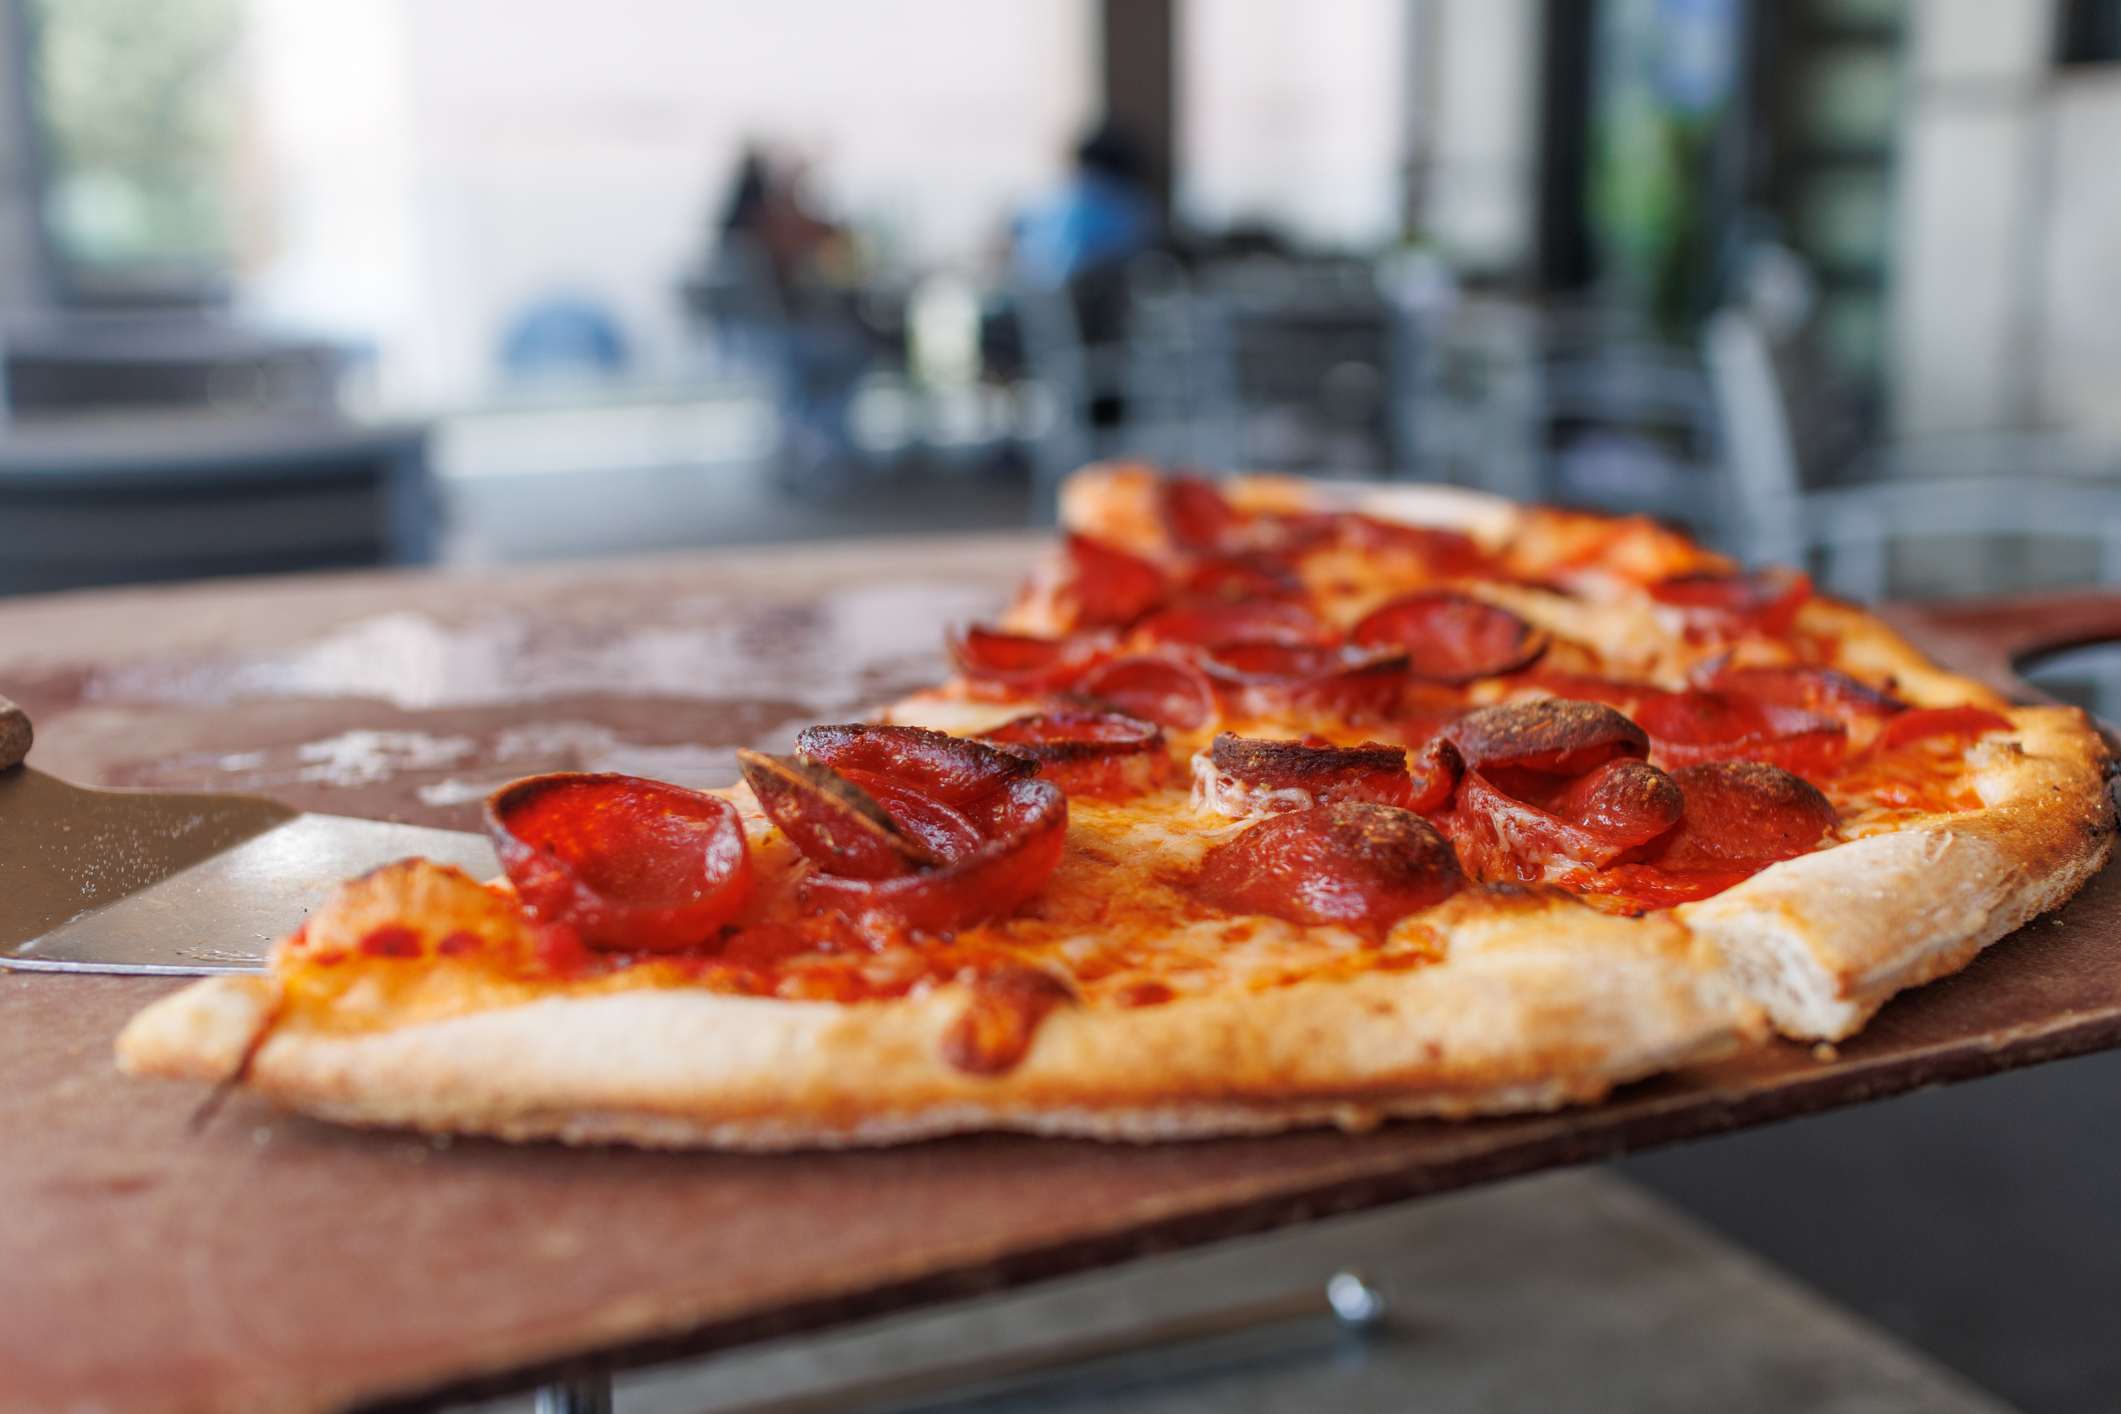 These 3 Best Friends' Pizza Chain Is Helping People Land Jobs In Their City Of Nashville